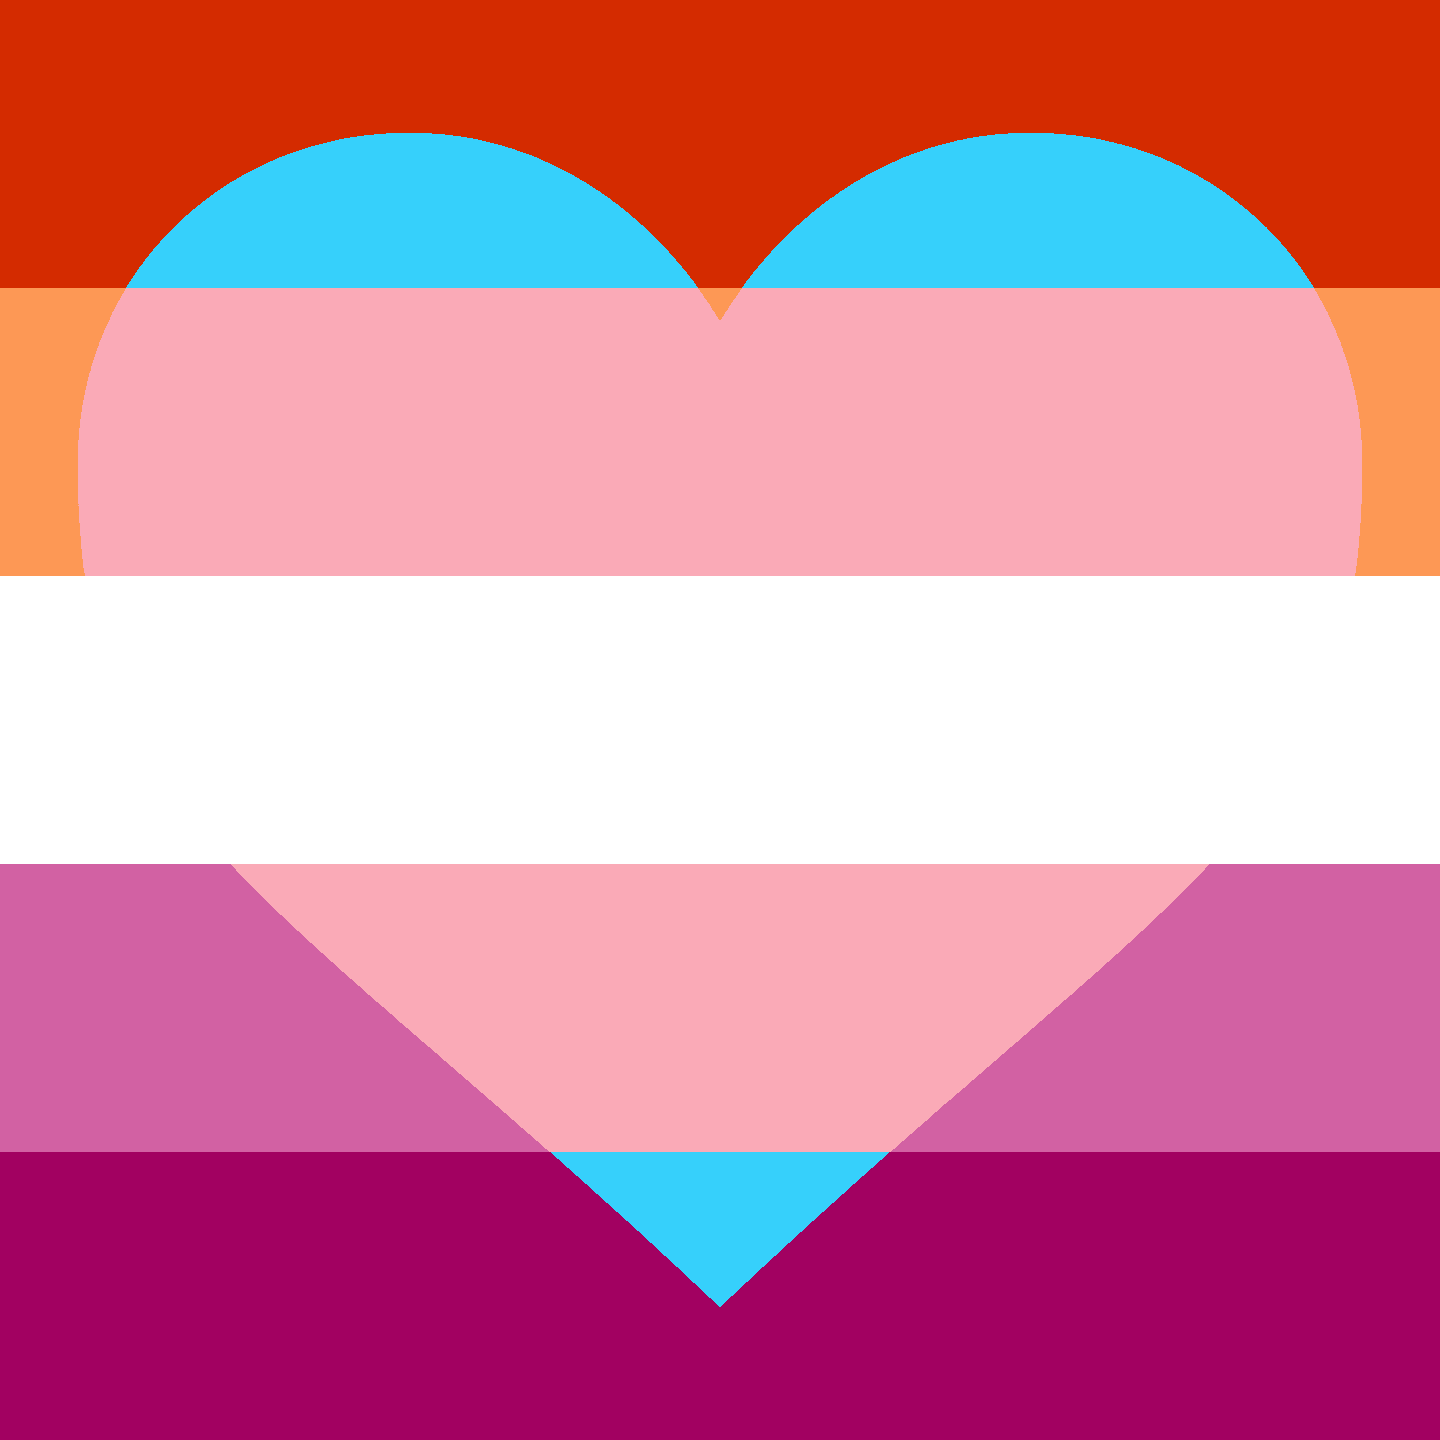 Trans heart on a lesbian flag. The white stripe in the middle is continouos. 